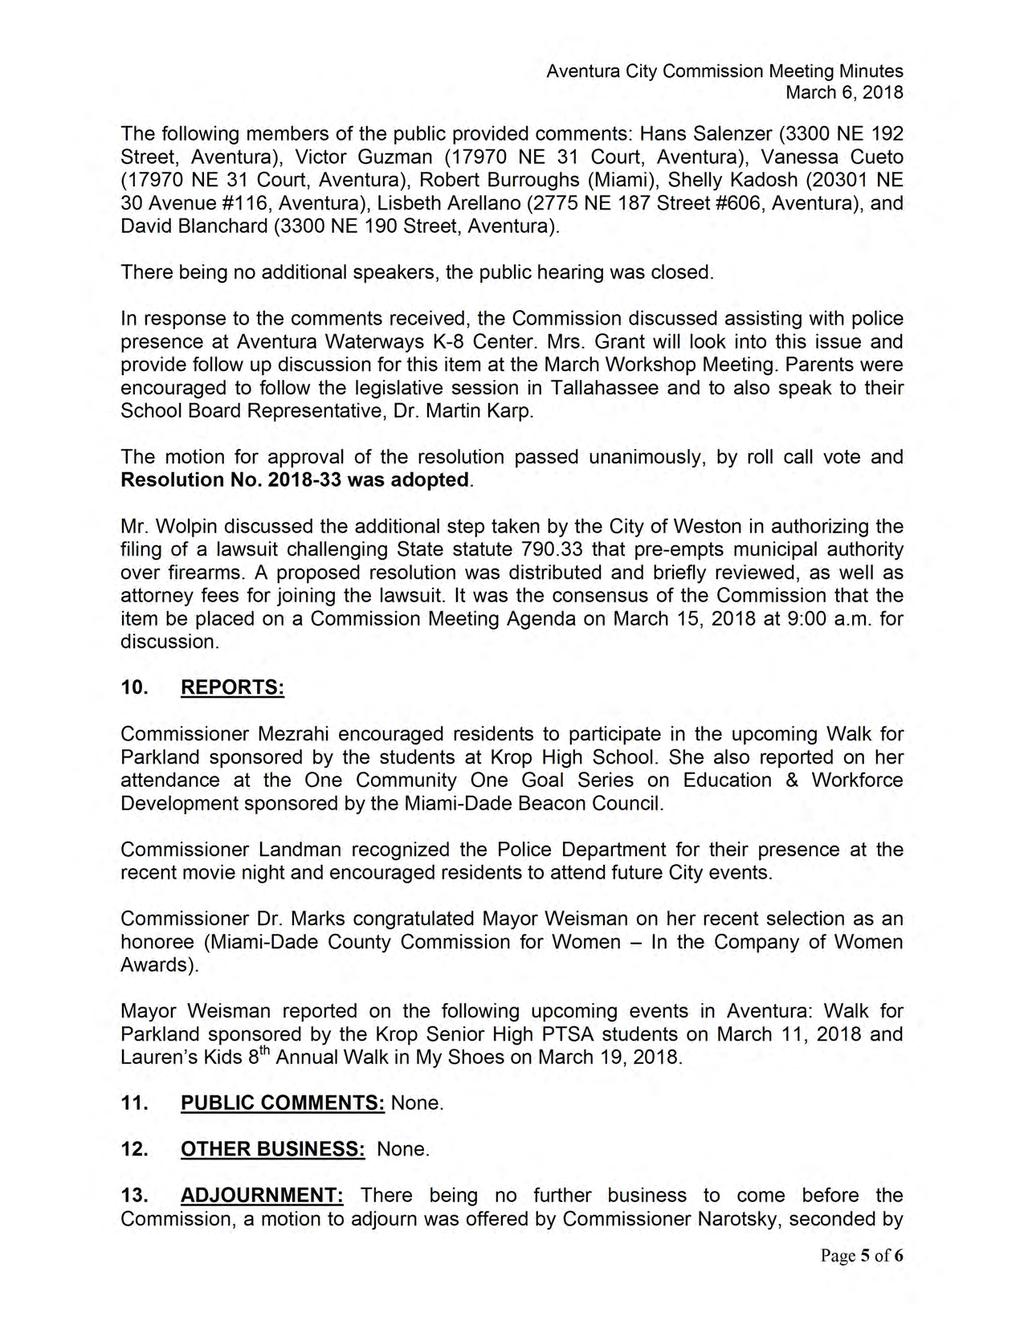 Aventura City Commission Meeting Minutes March 6, 2018 The following members of the public provided comments: Hans Salenzer ( 3300 NE 192 Street, Aventura), Victor Guzman ( 17970 NE 31 Court,